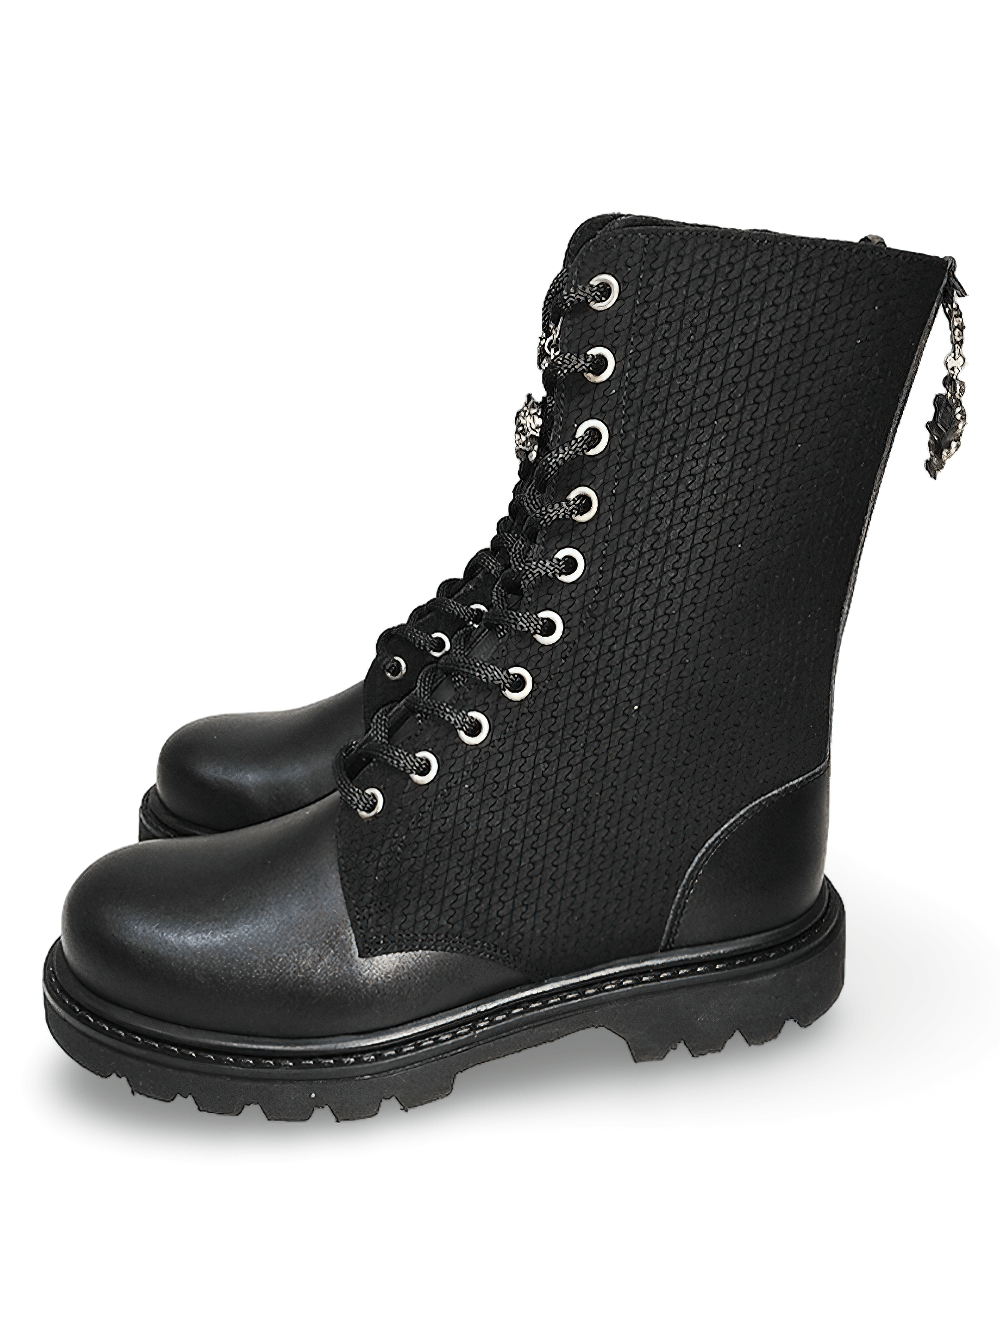 Black 10-Eyelet Ranger Boots with Textile Detail